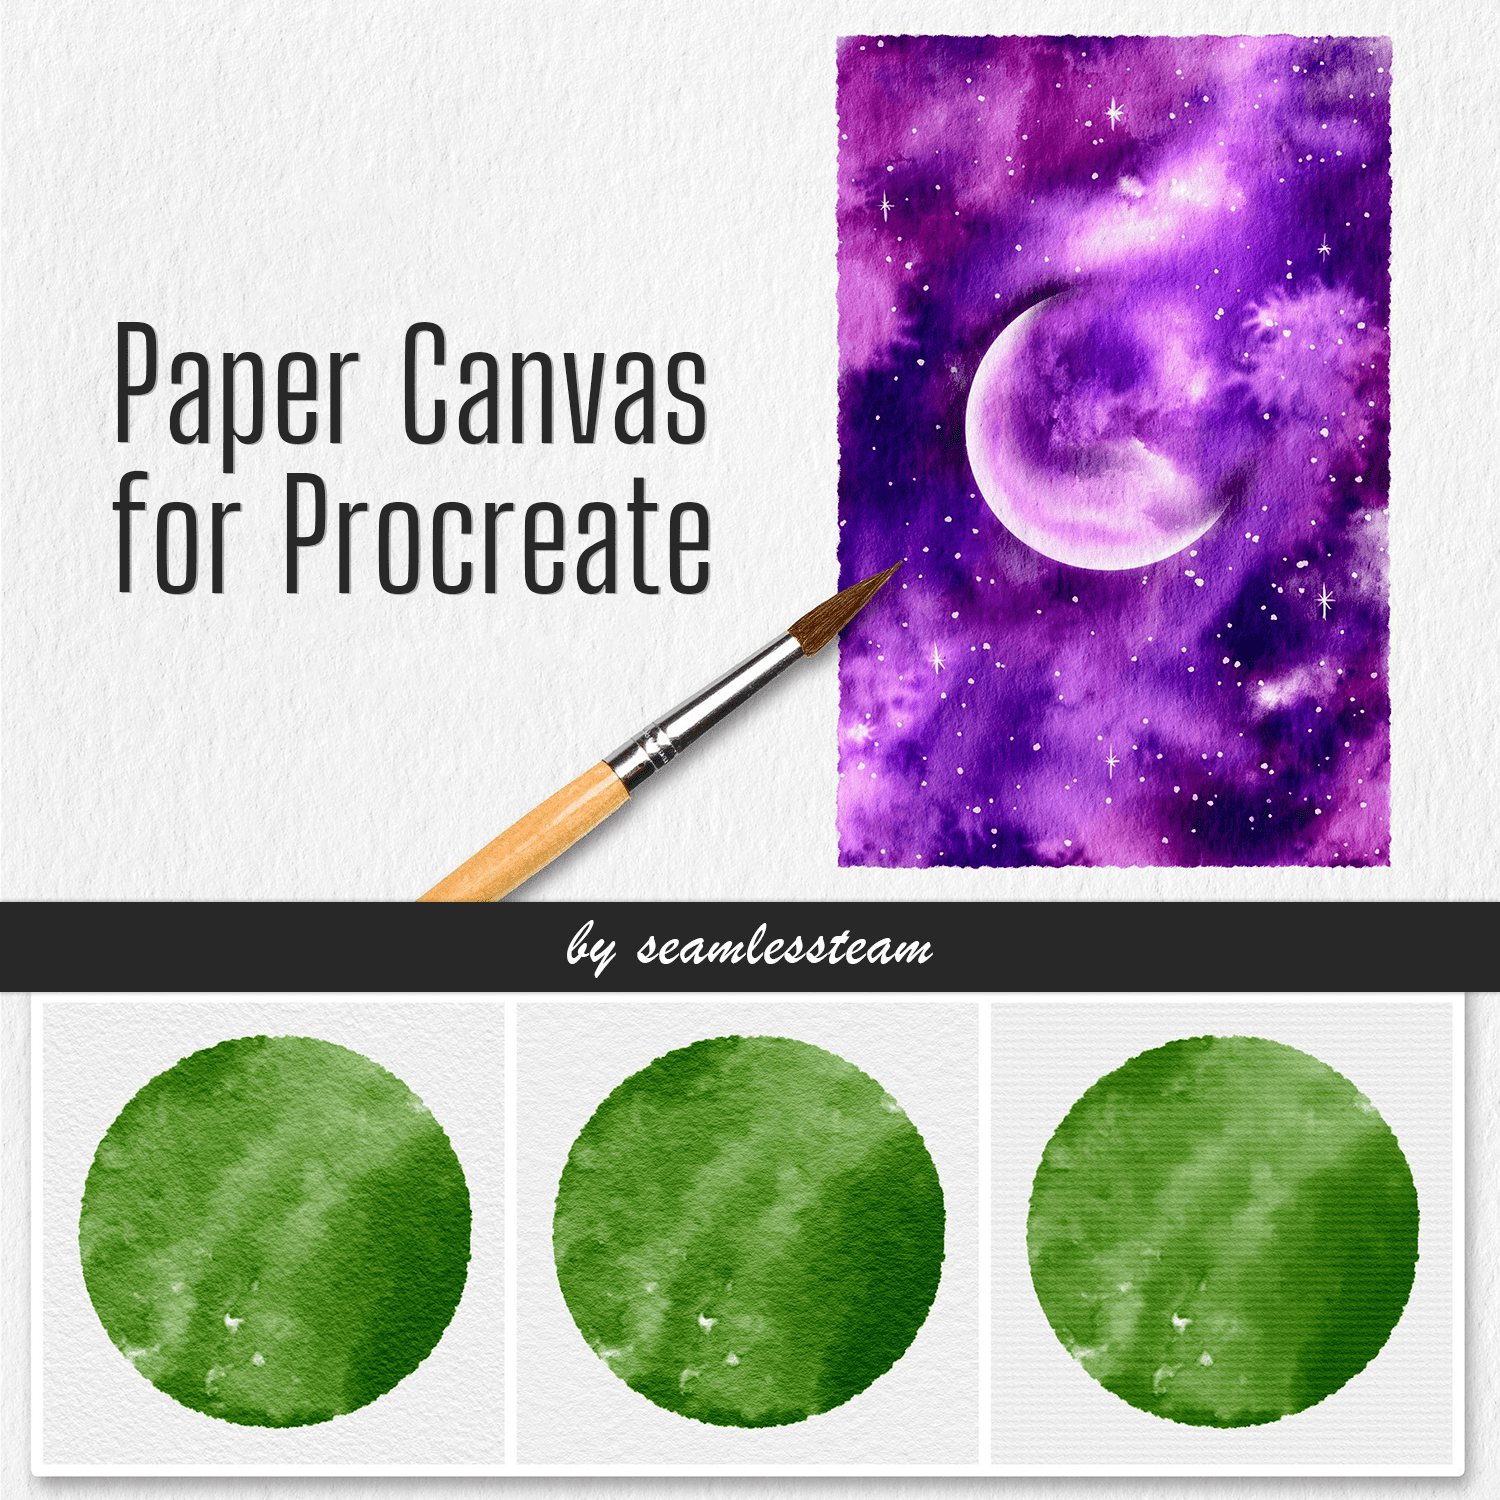 Paper Canvas for Procreate created by seamlessteam.